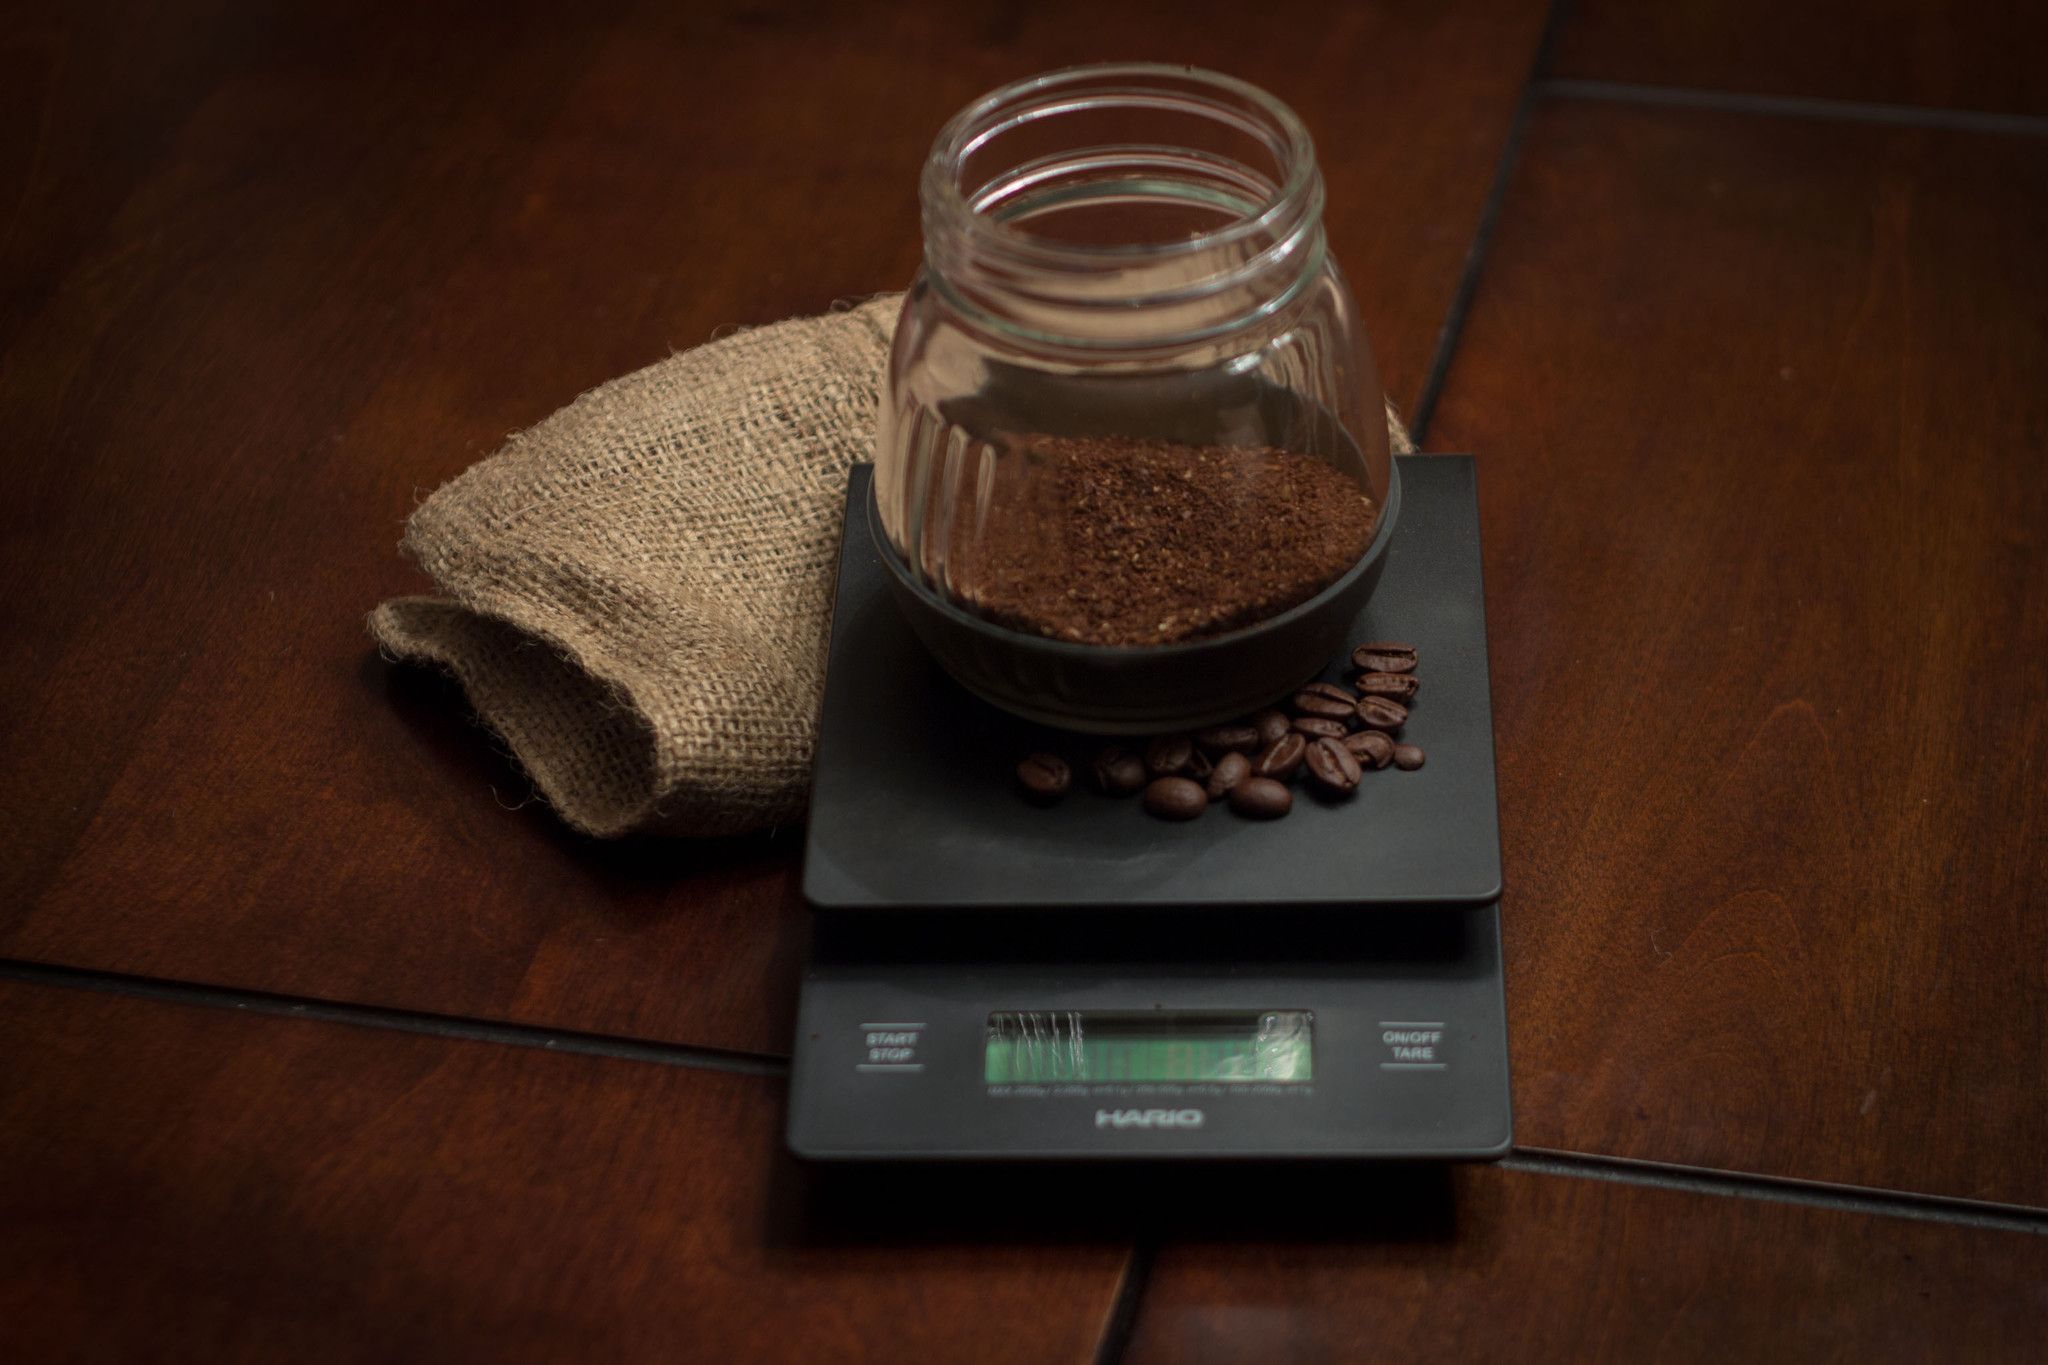 How to Measure Coffee With or Without Scales